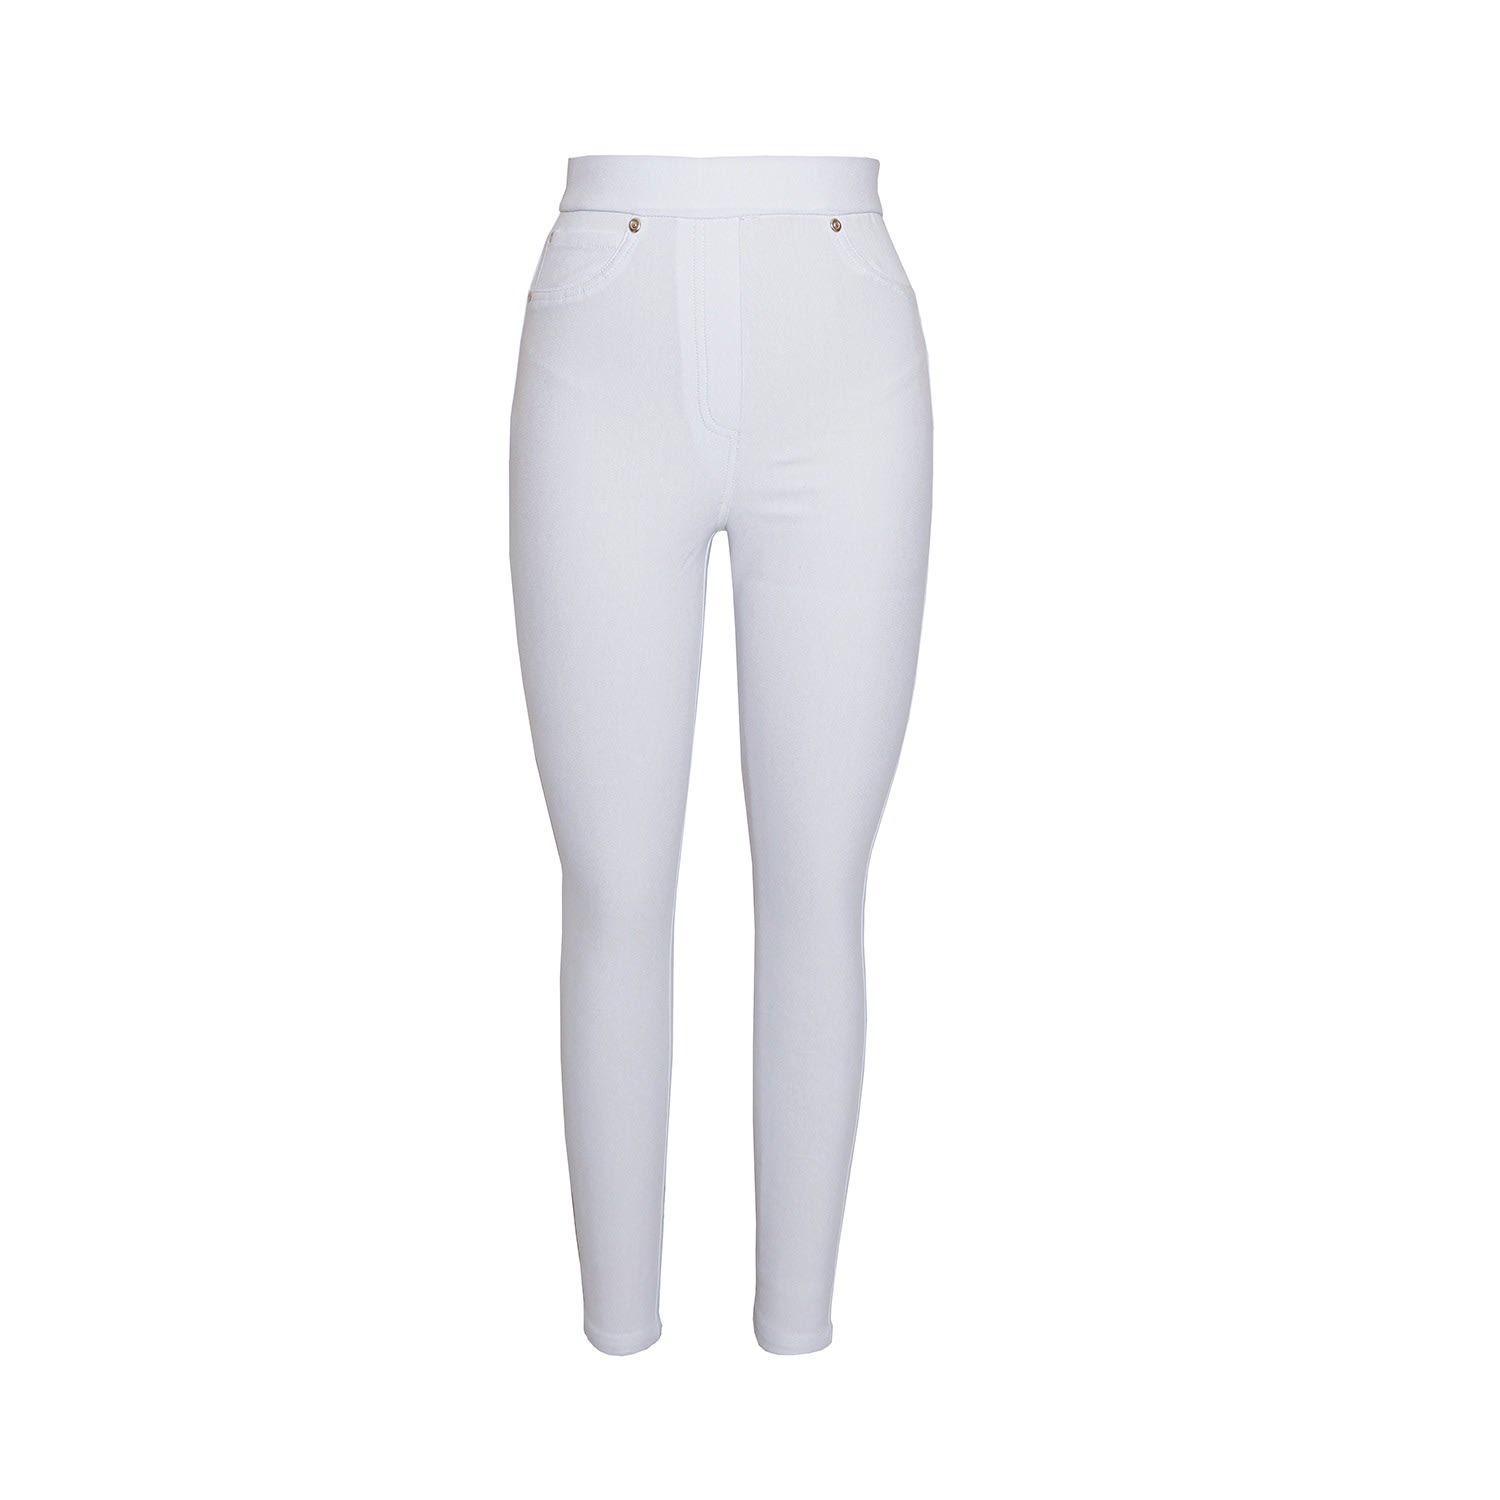 Women’s Btw Jegging - White Small Emma Wallace